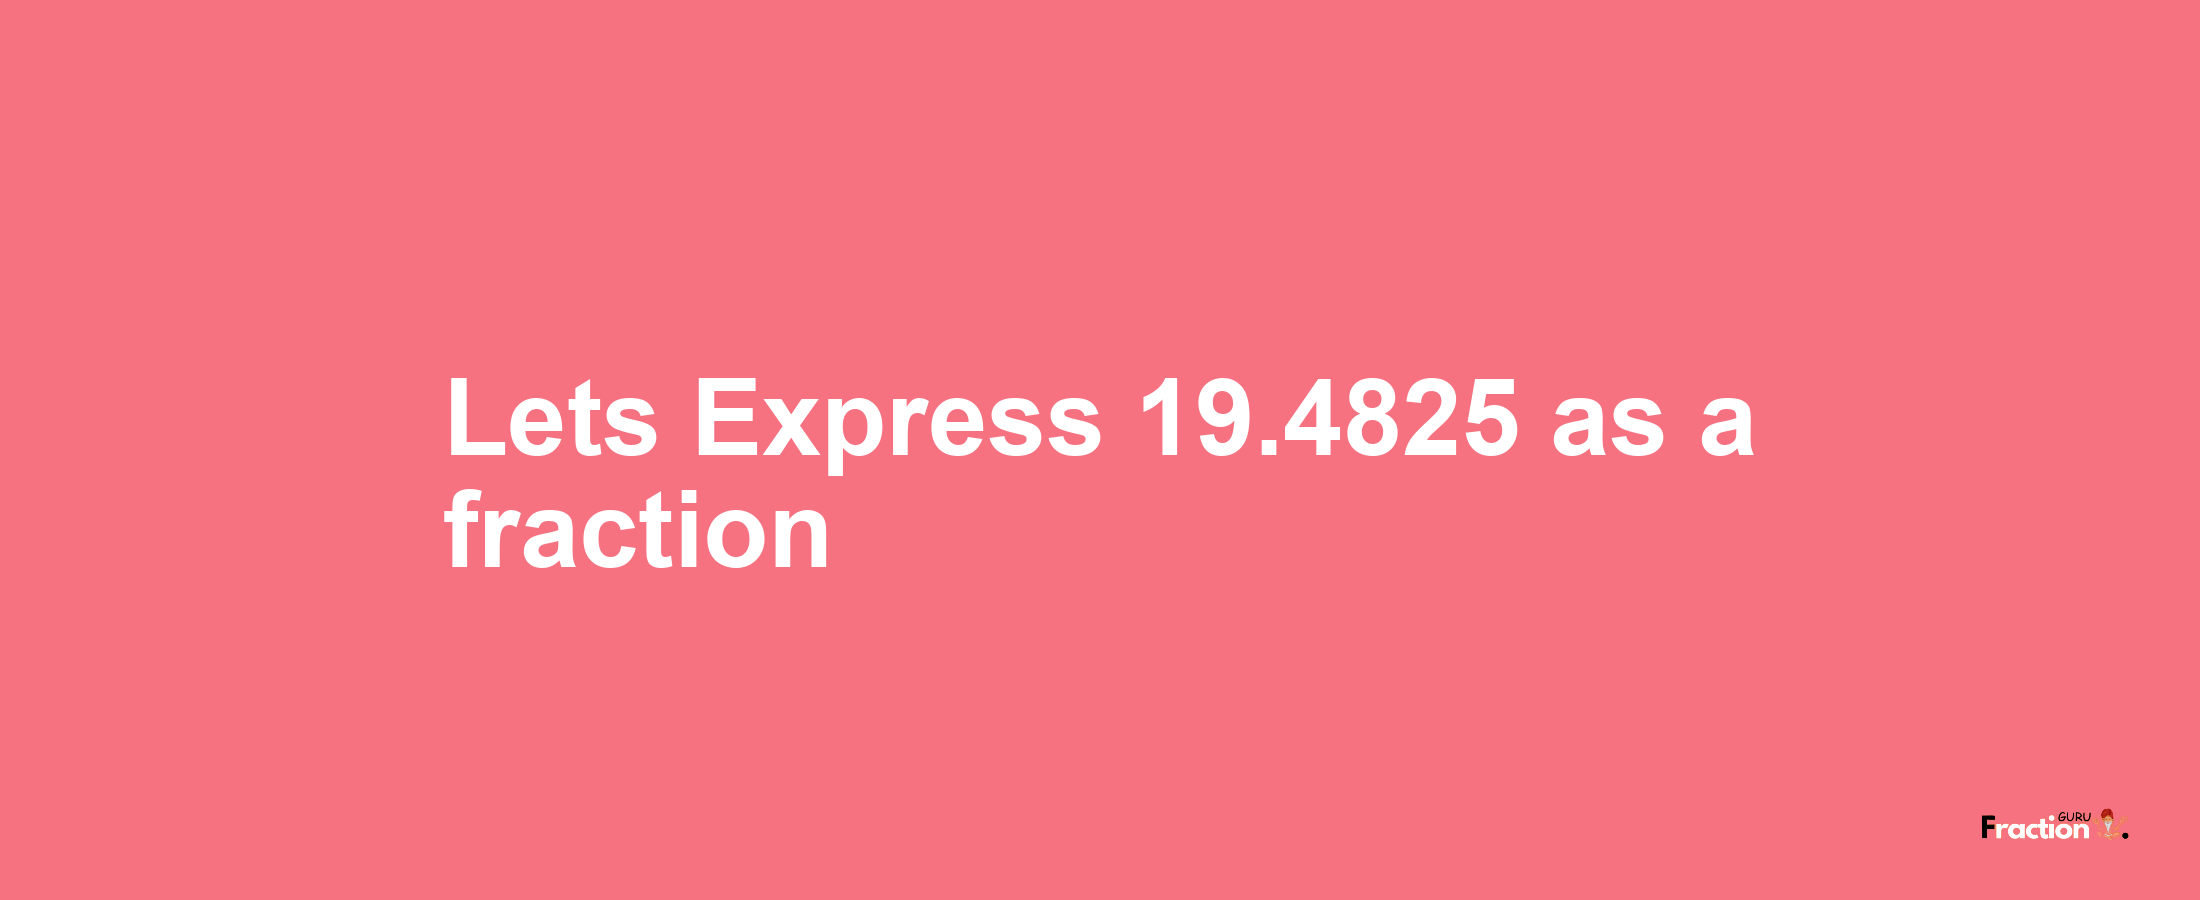 Lets Express 19.4825 as afraction